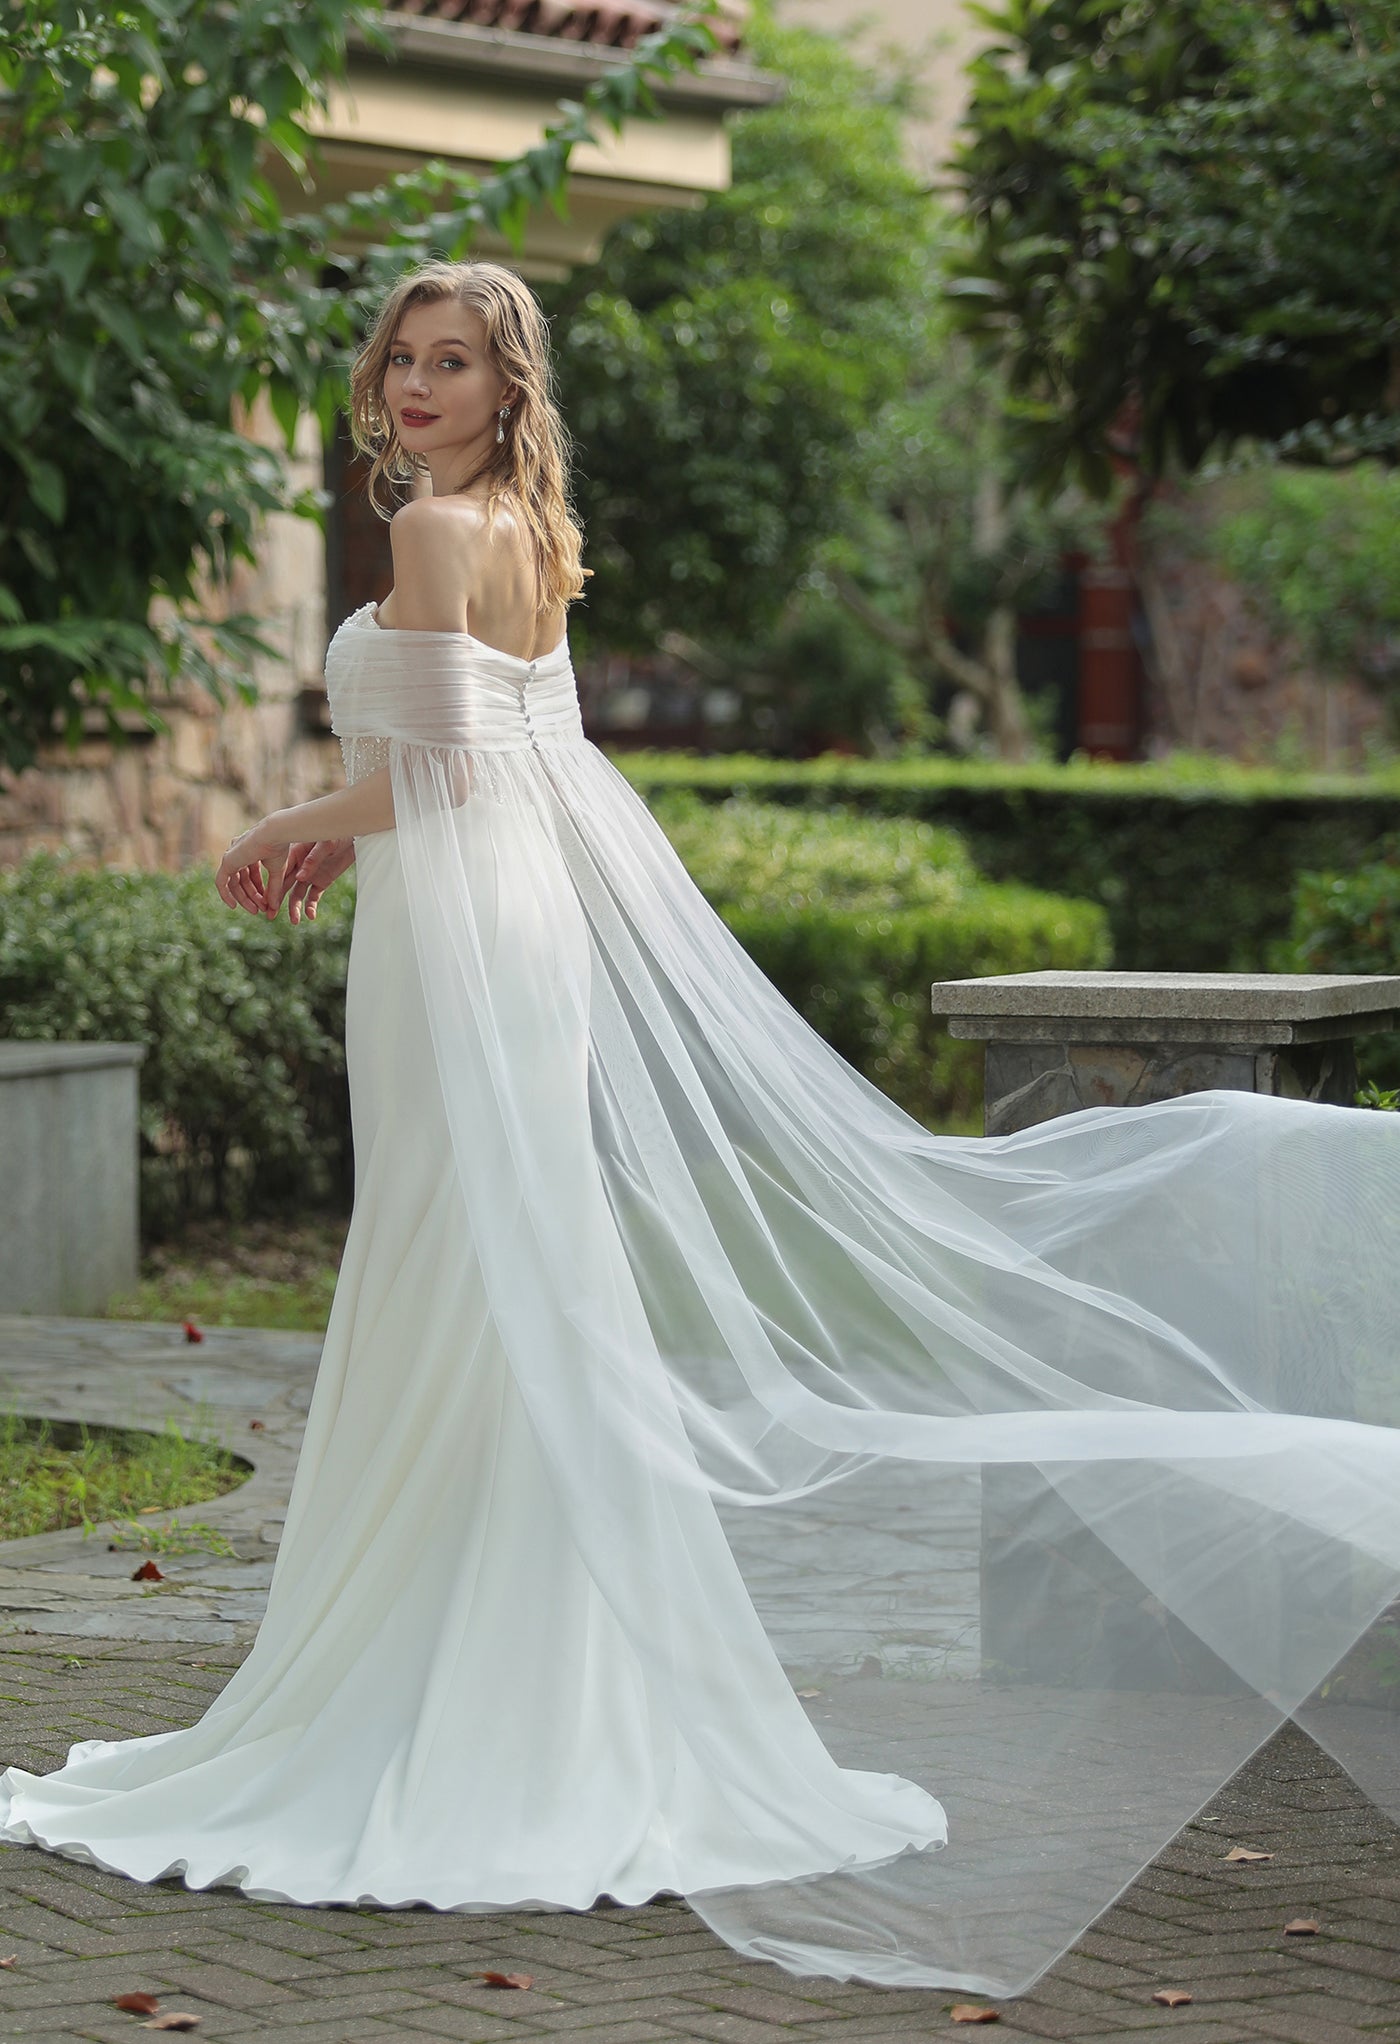 A woman in a Bergamot Bridal plunging sweetheart neckline beaded crepe fit and flare wedding dress looks over her shoulder in a garden pathway, with scattered leaves and trees in the background.